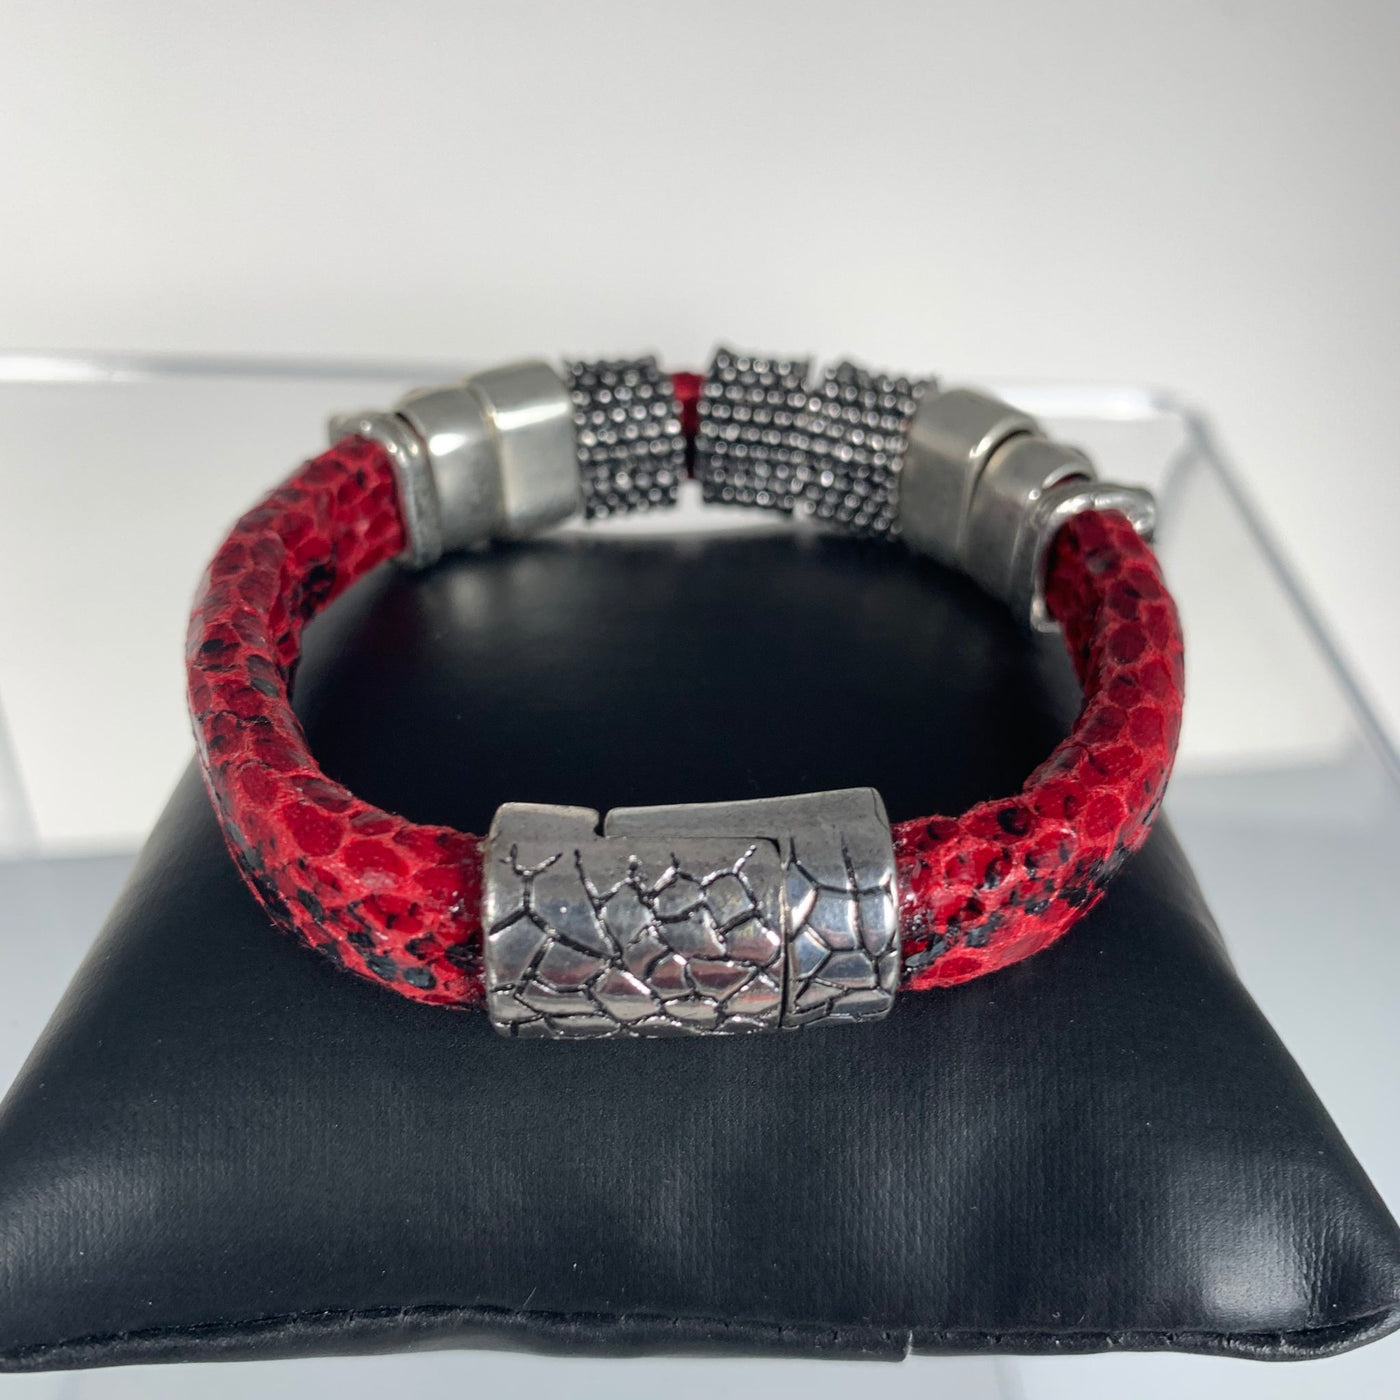 Red Faux Snake Skin Band Bracelet Featuring SPARKS